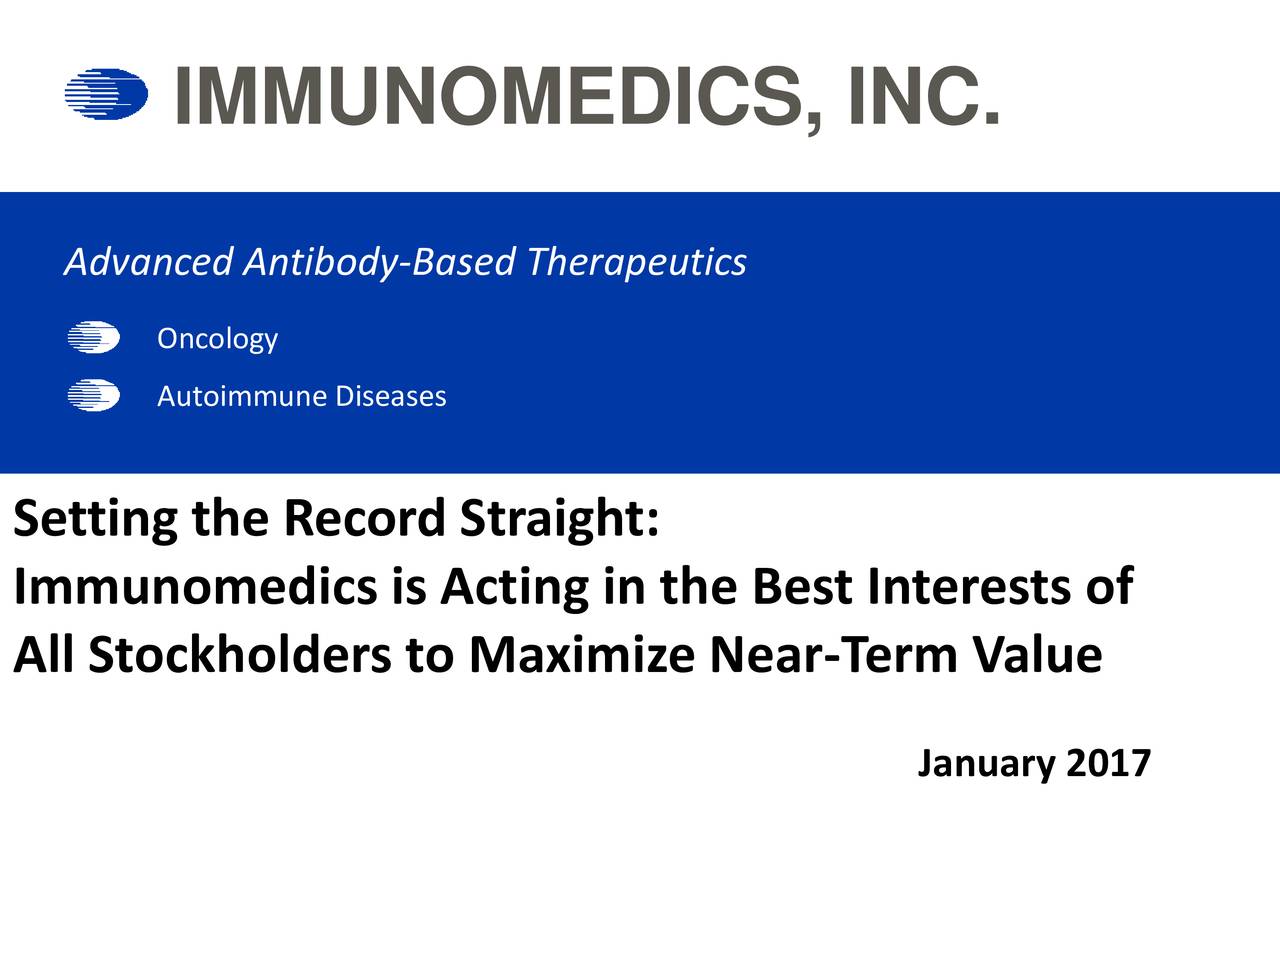 0 36 108 IMMUNOMEDICS, INC. 31 63 125 255 76 0 Advanced Antibody-Based Therapeutics 252 145 63 Oncology 252 174 113 Autoimmune Diseases 0 24 70 Setting the Record Straight: 175 165 147 131 126 116 Immunomedics is Acting in the Best Interests of 114 90 48 All Stockholders to Maximize Near-Term Value 215 208 196 171 176 186 January 2017 242 242 242 213 227 255